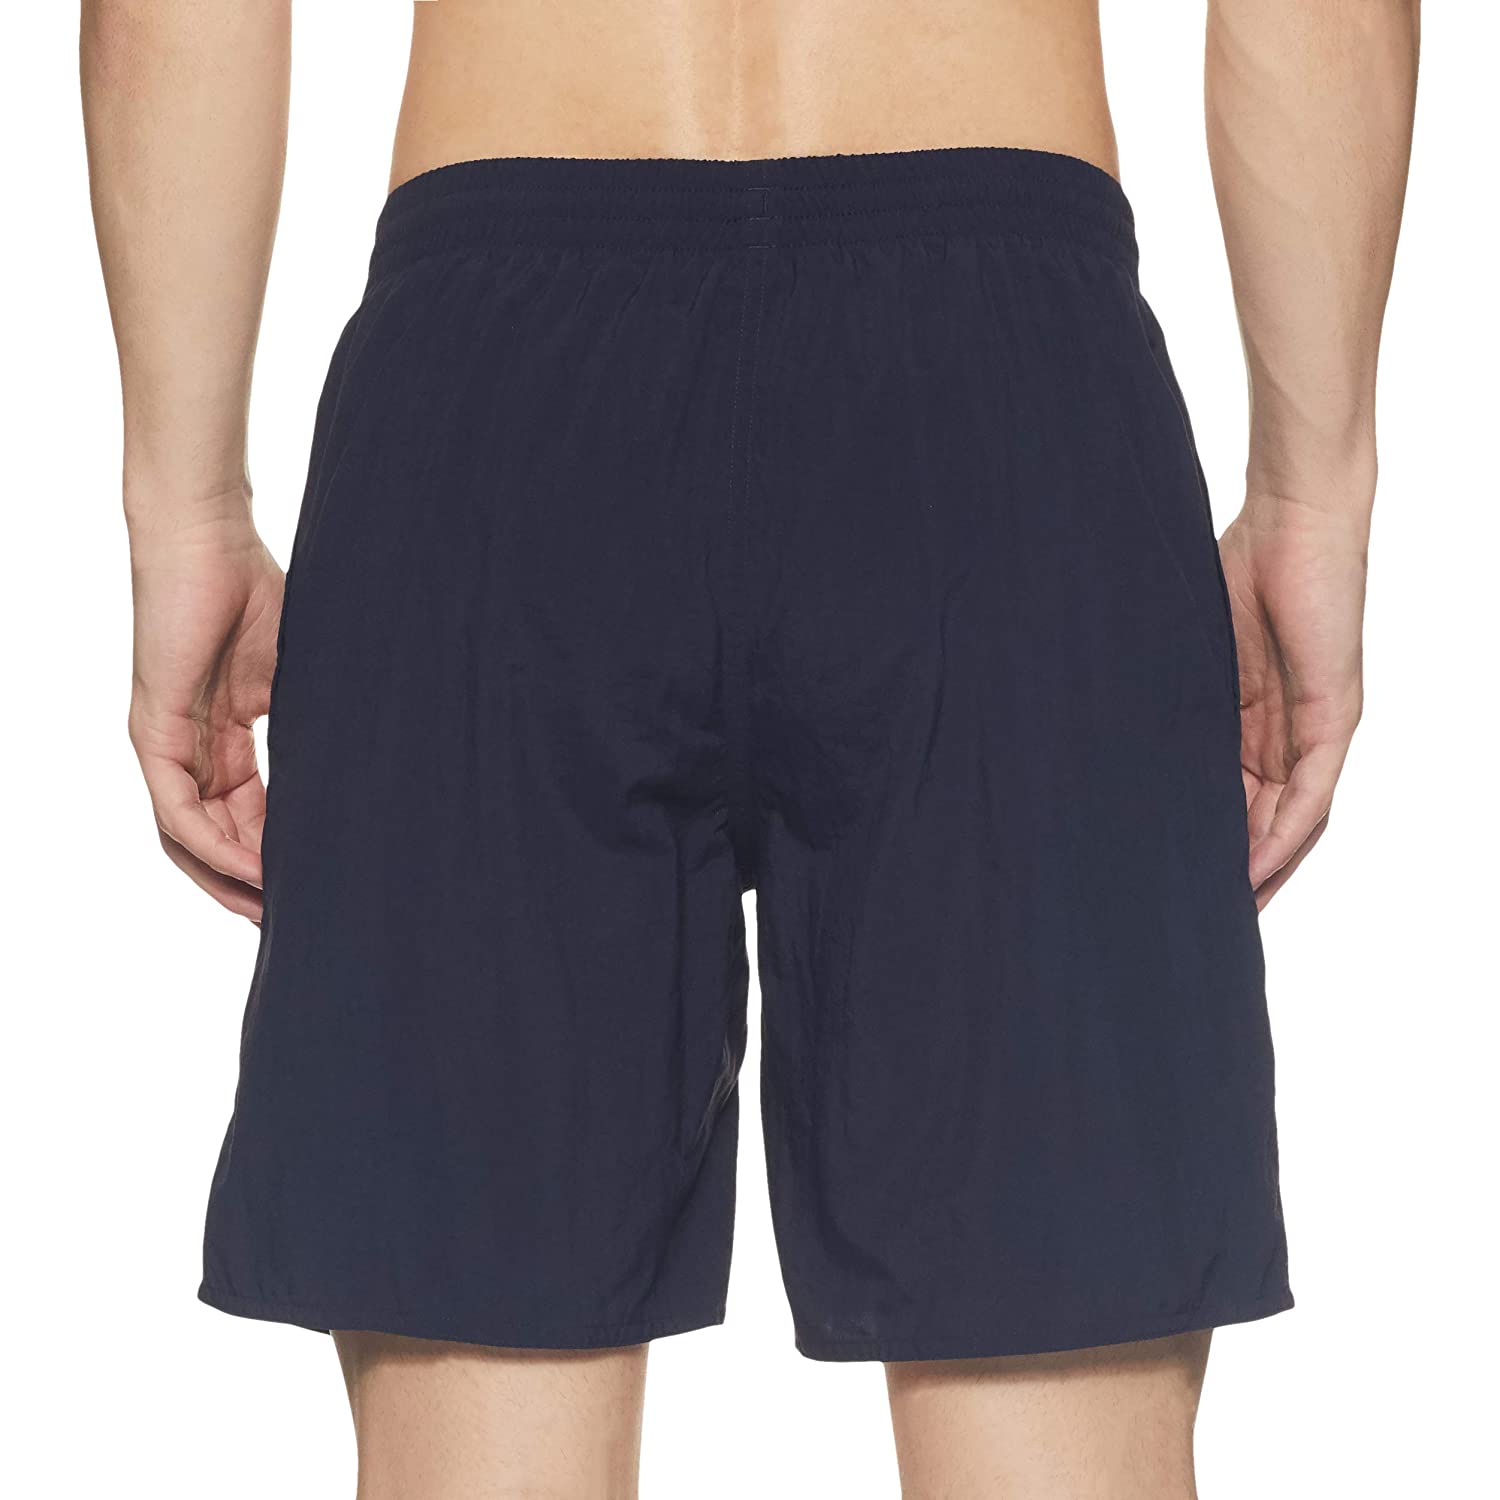 Speedo Essential Placement Printed 18\" Watershorts For Male - Best Price online Prokicksports.com